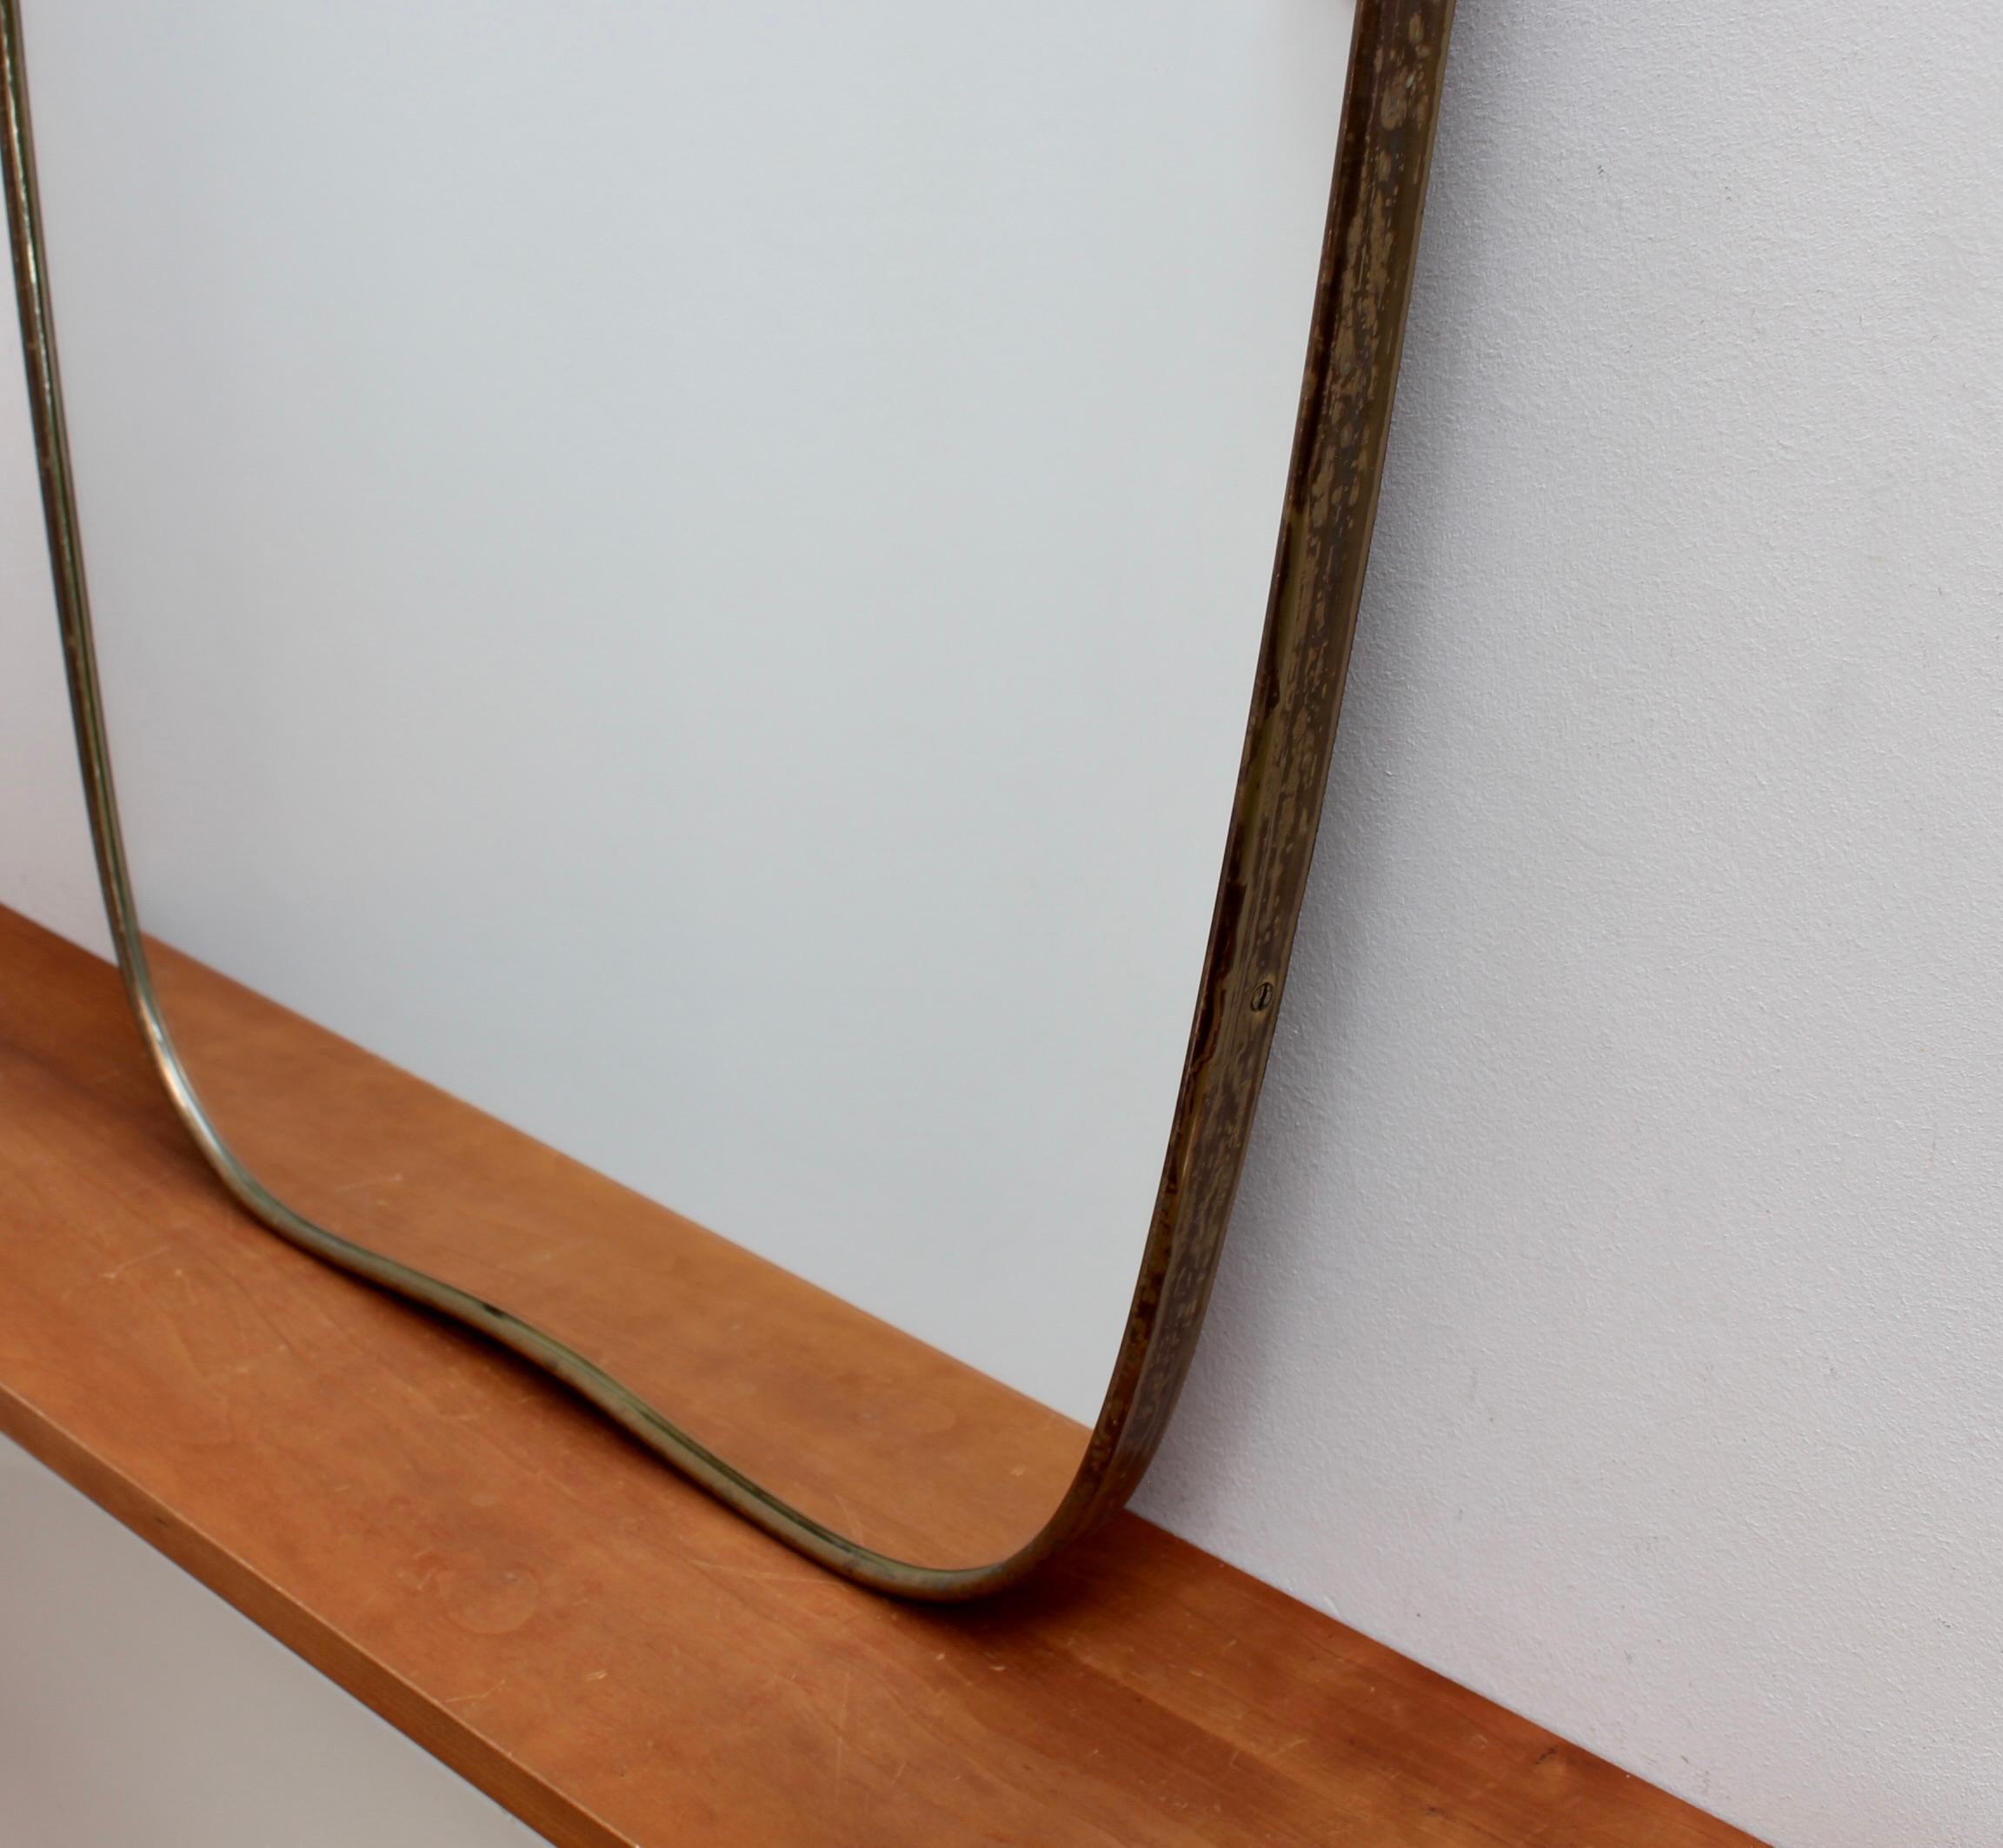 Vintage Italian Wall Mirror with Brass Frame (circa 1950s) - Large For Sale 4